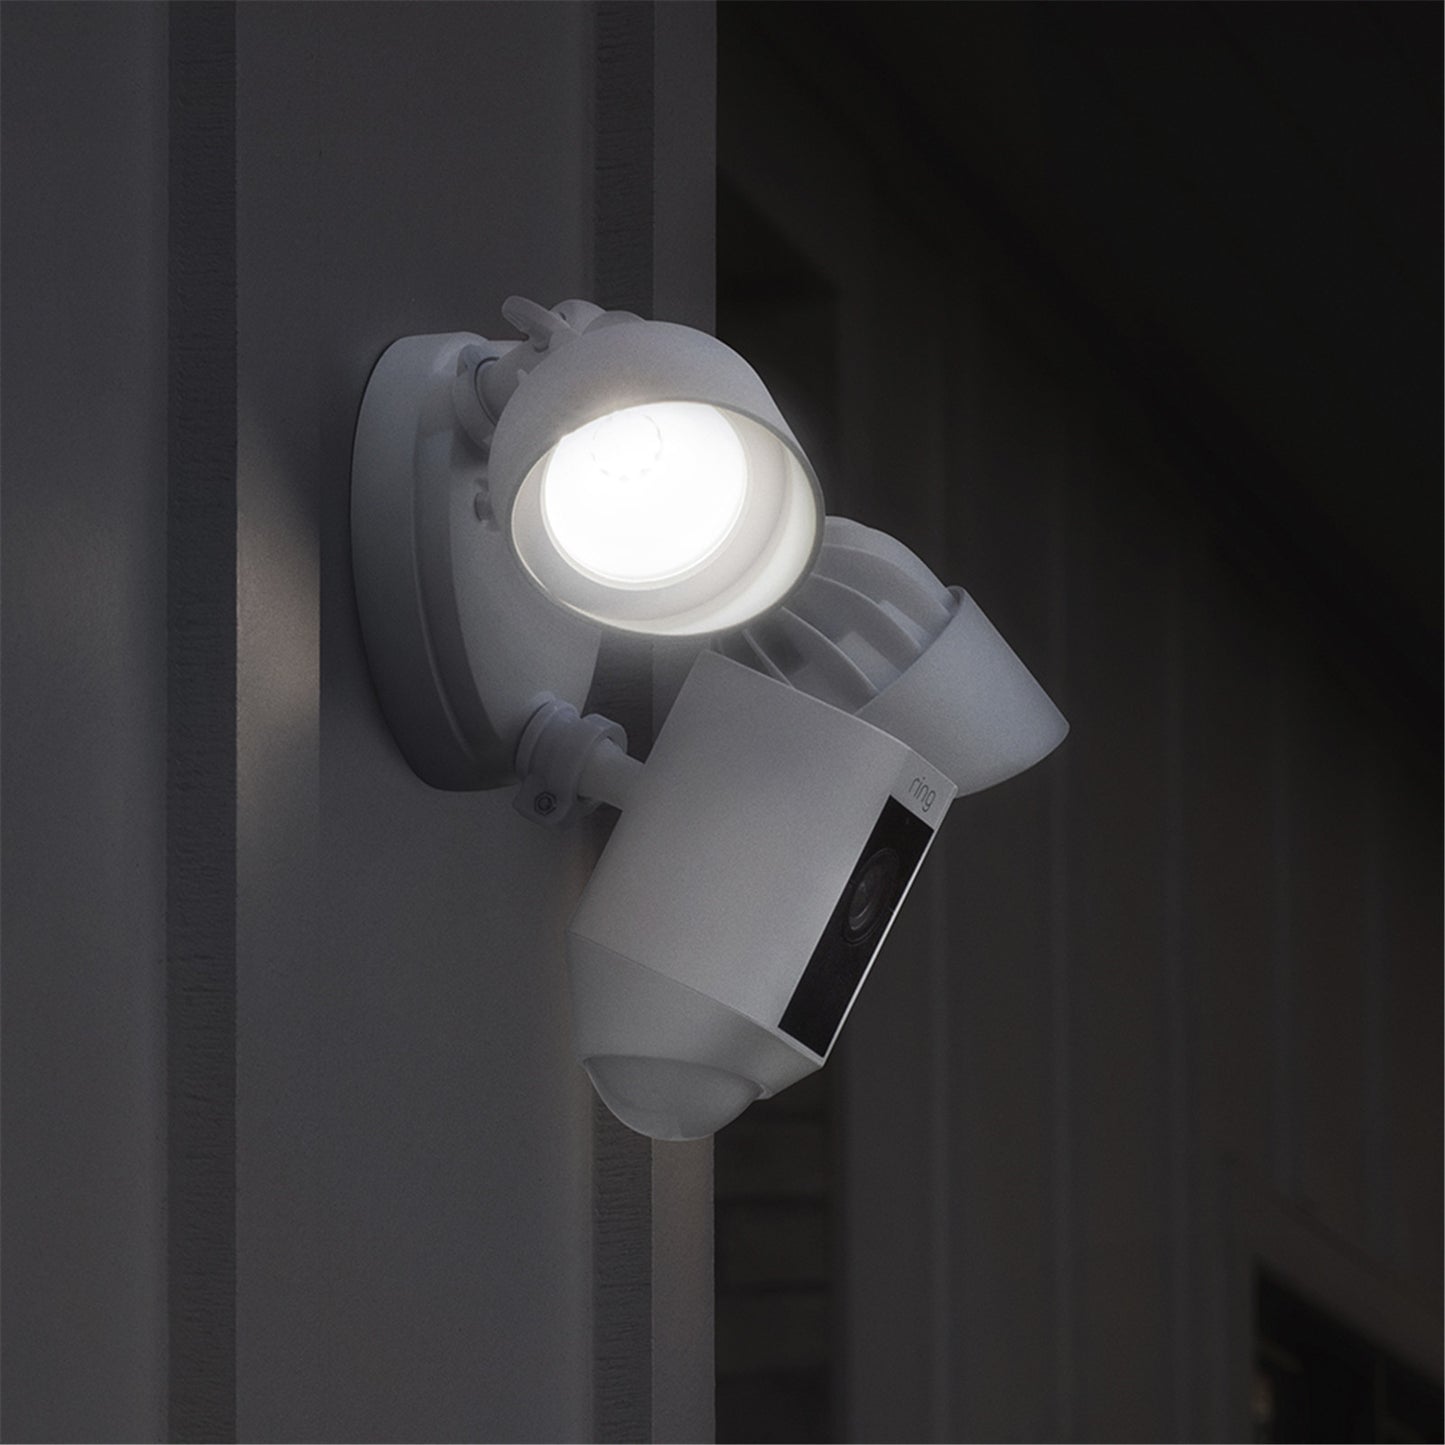 Ring Floodlight Camera Wired Plus